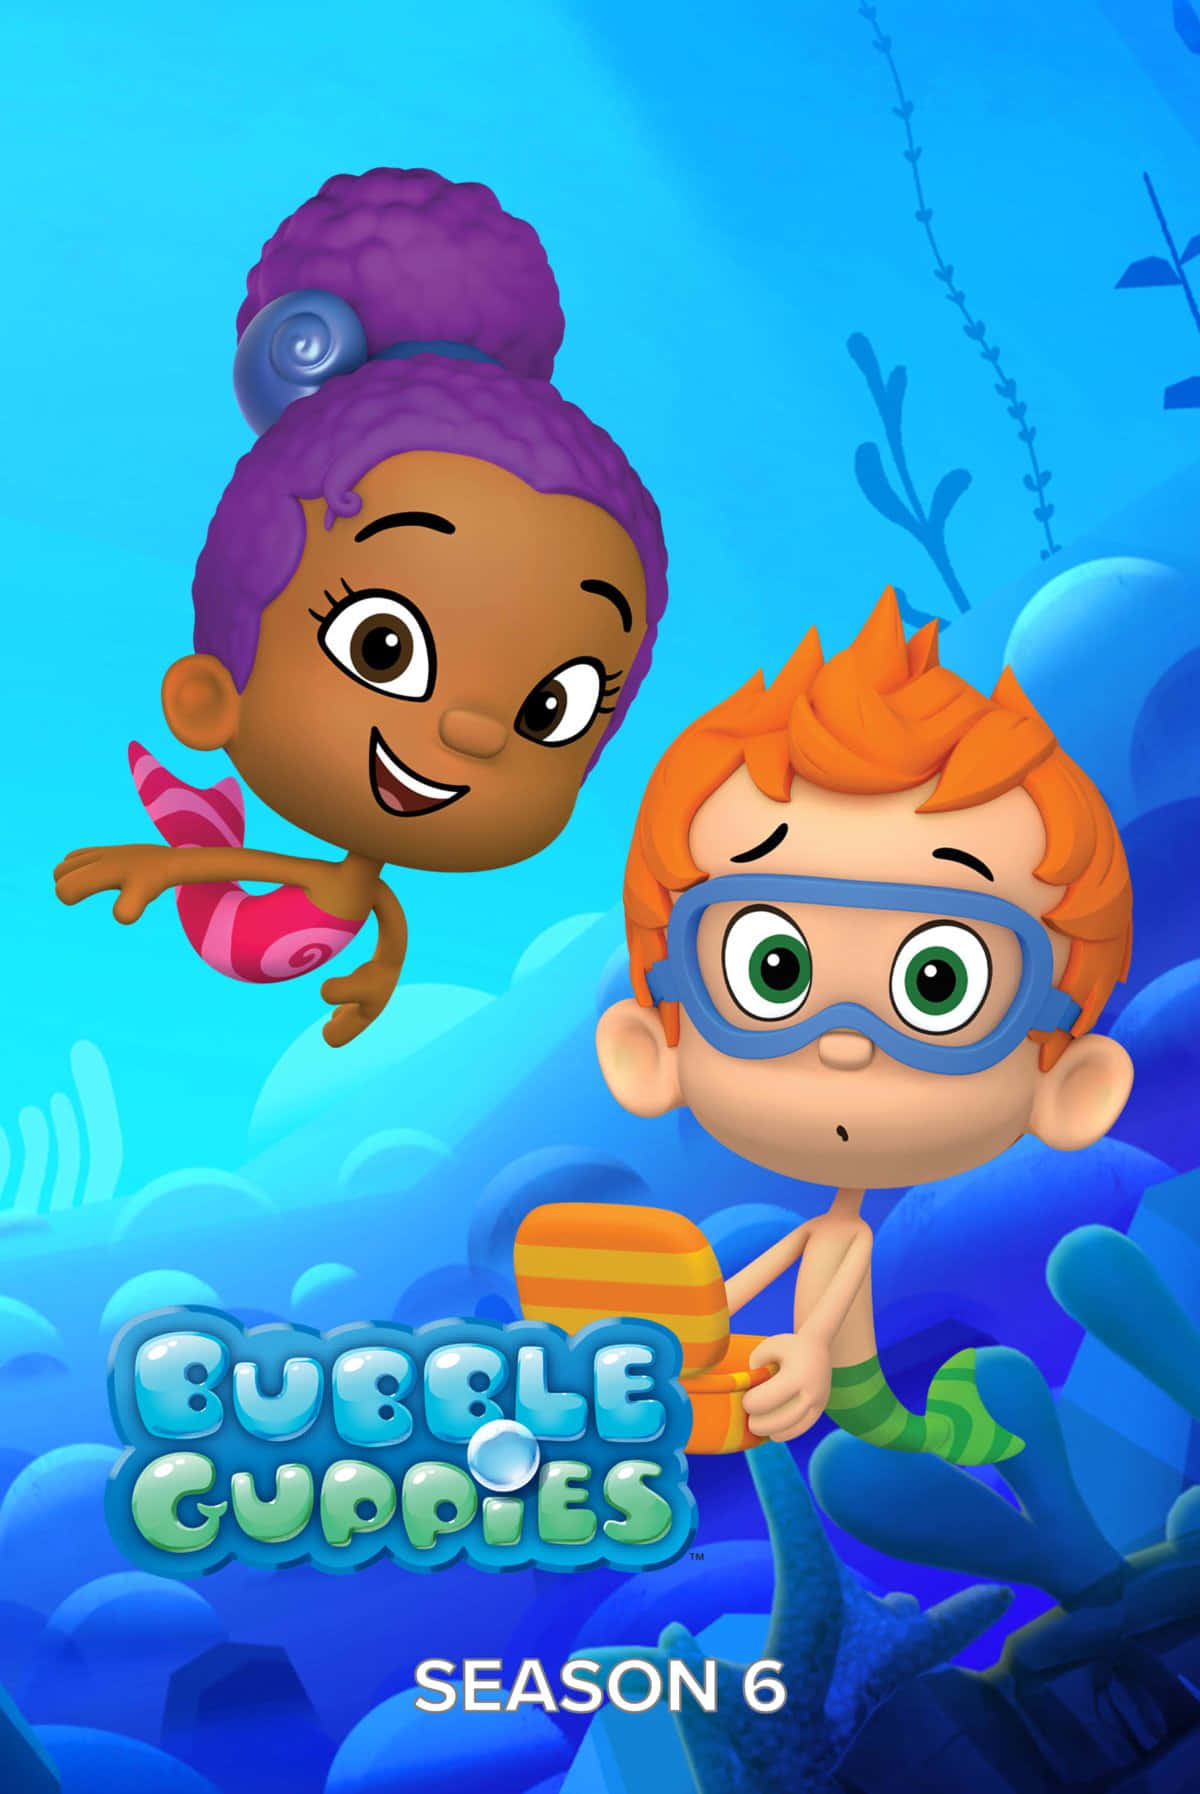 Come explore a magical underwater world with Molly, Gil, and all their Bubble Guppy friends!